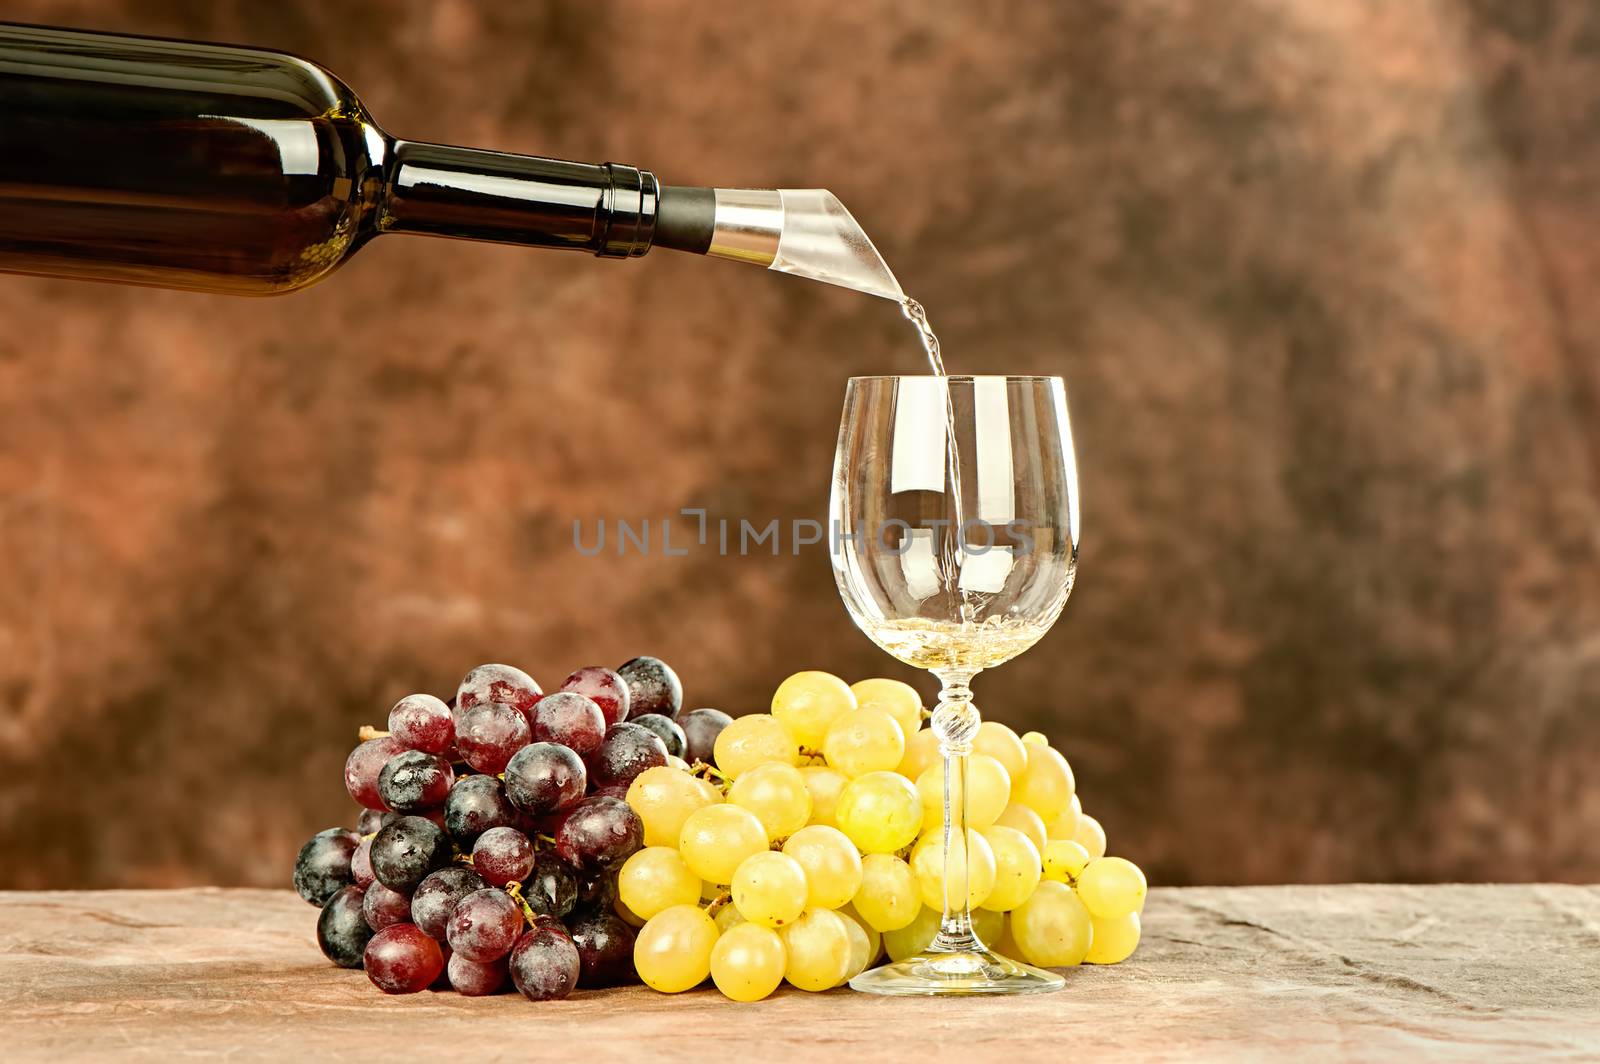 pour wine in cup by imarin